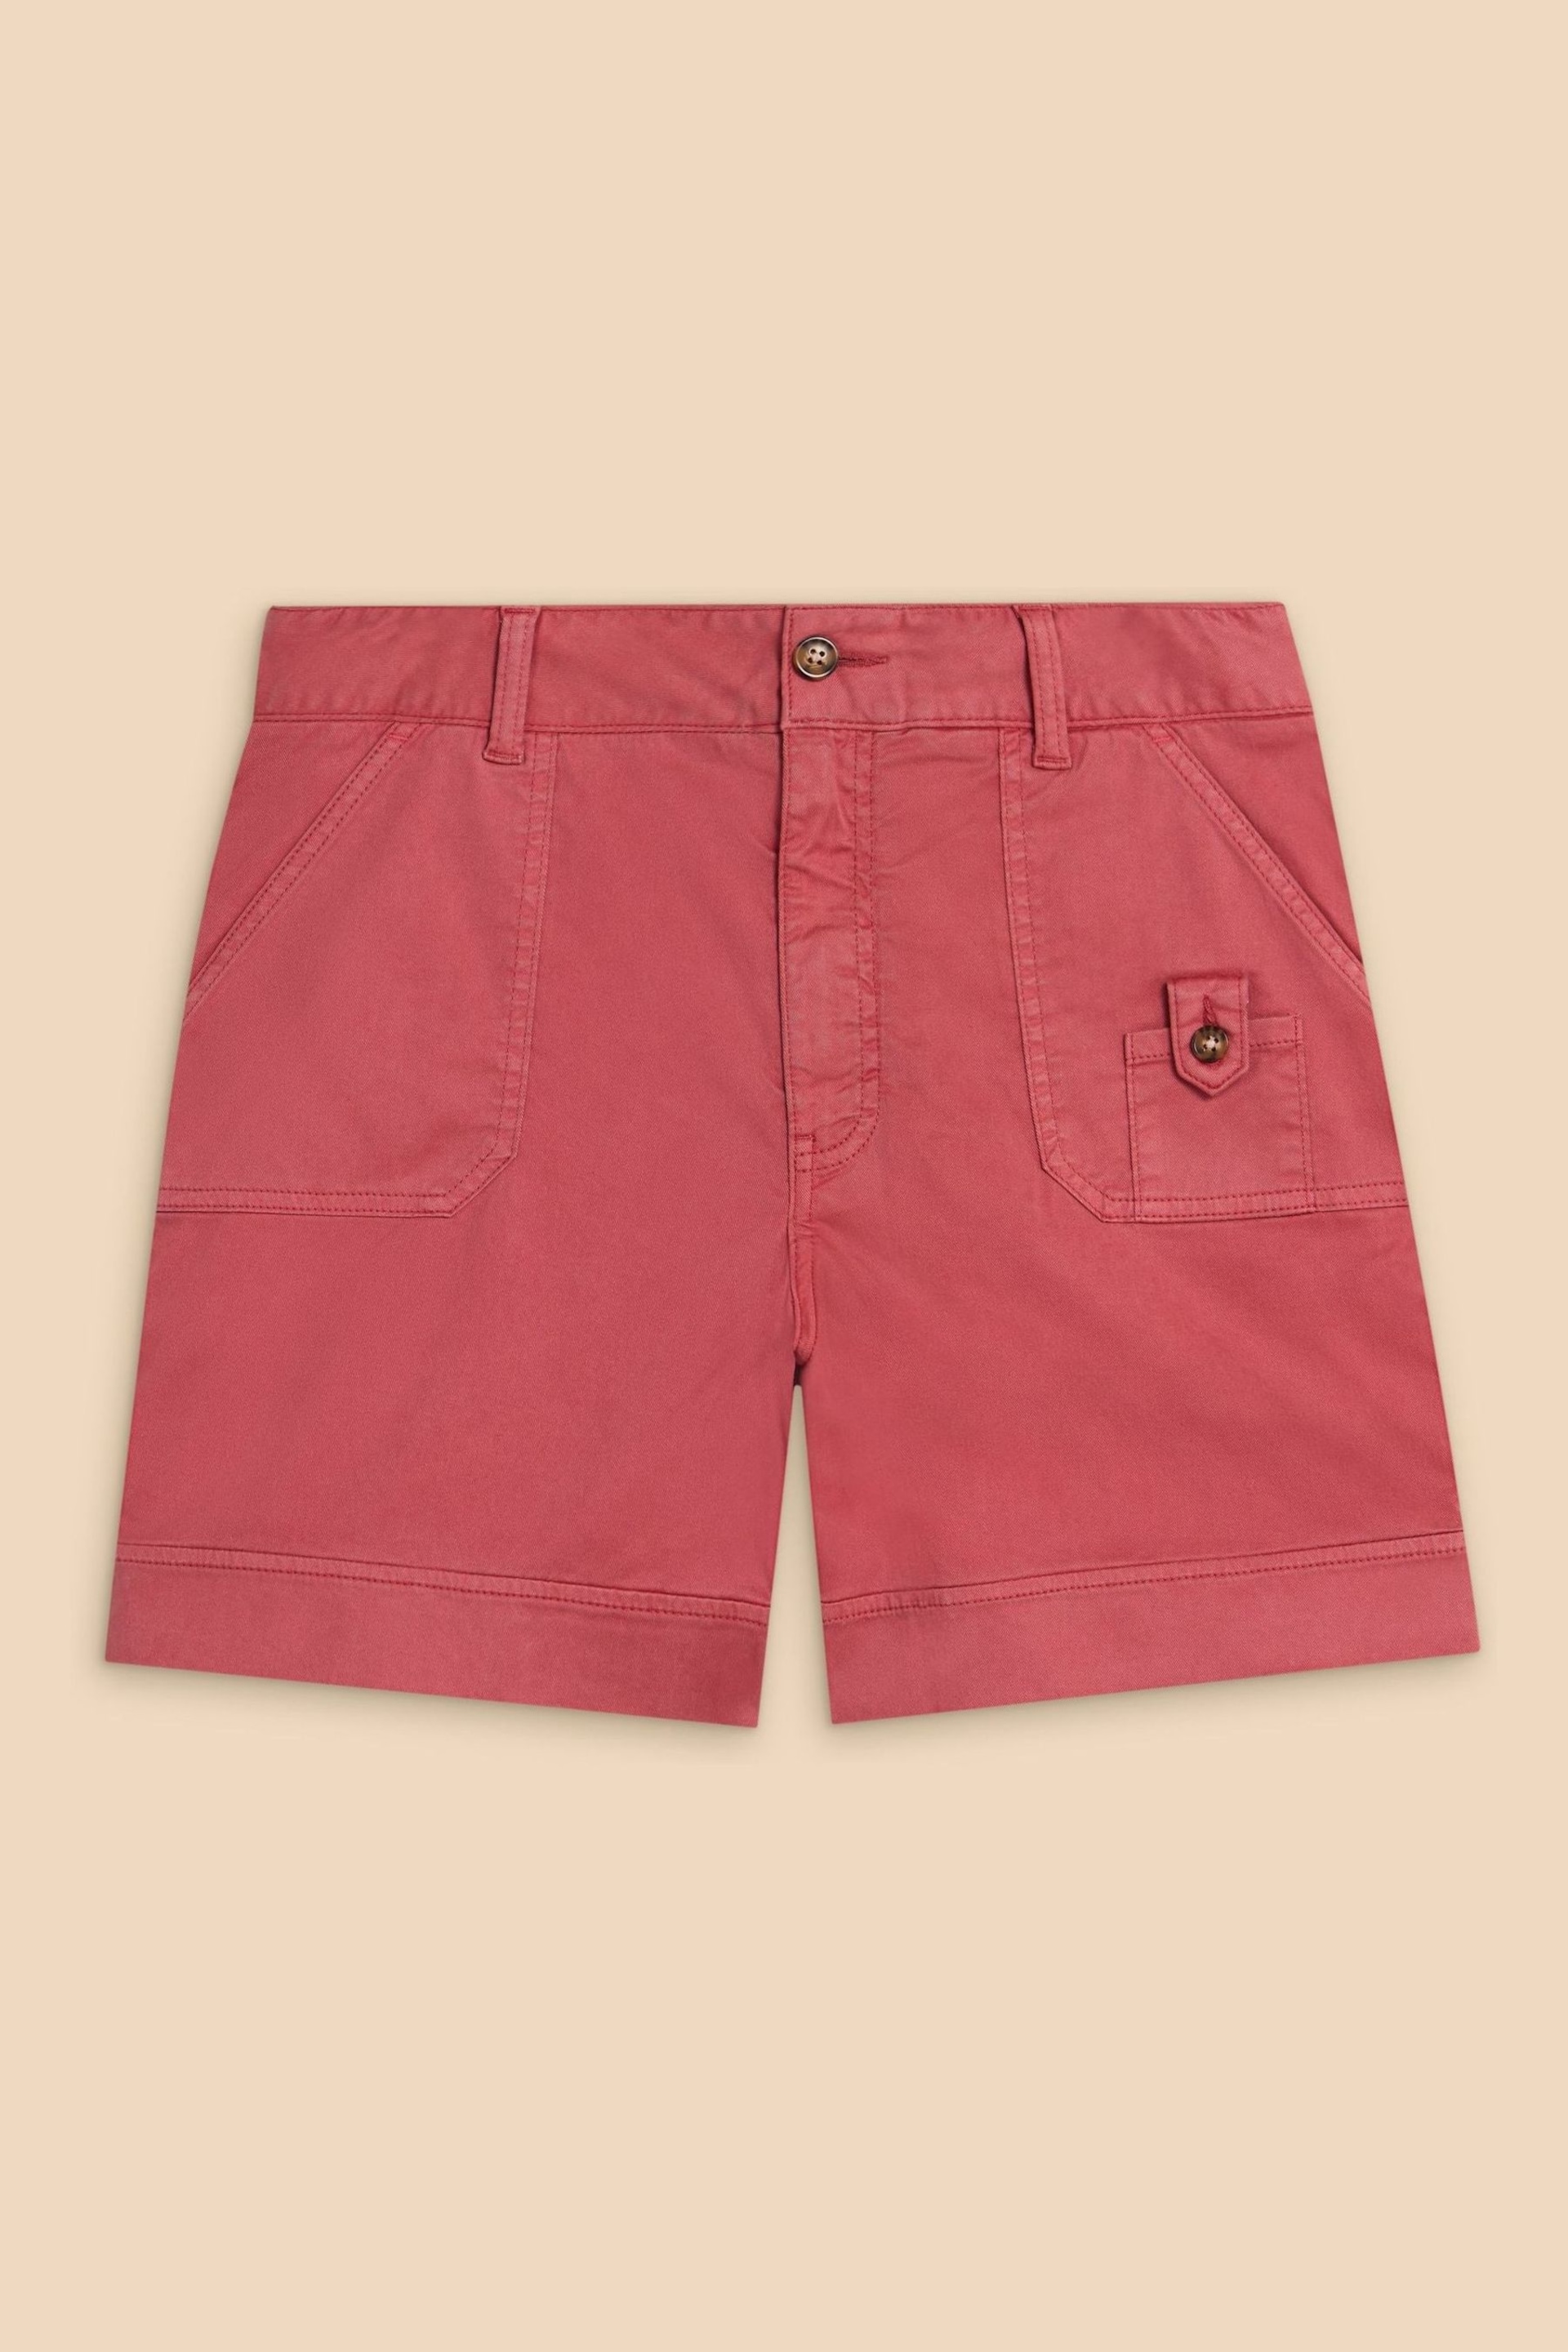 White Stuff Red Mollie Combat Shorts - Image 5 of 6